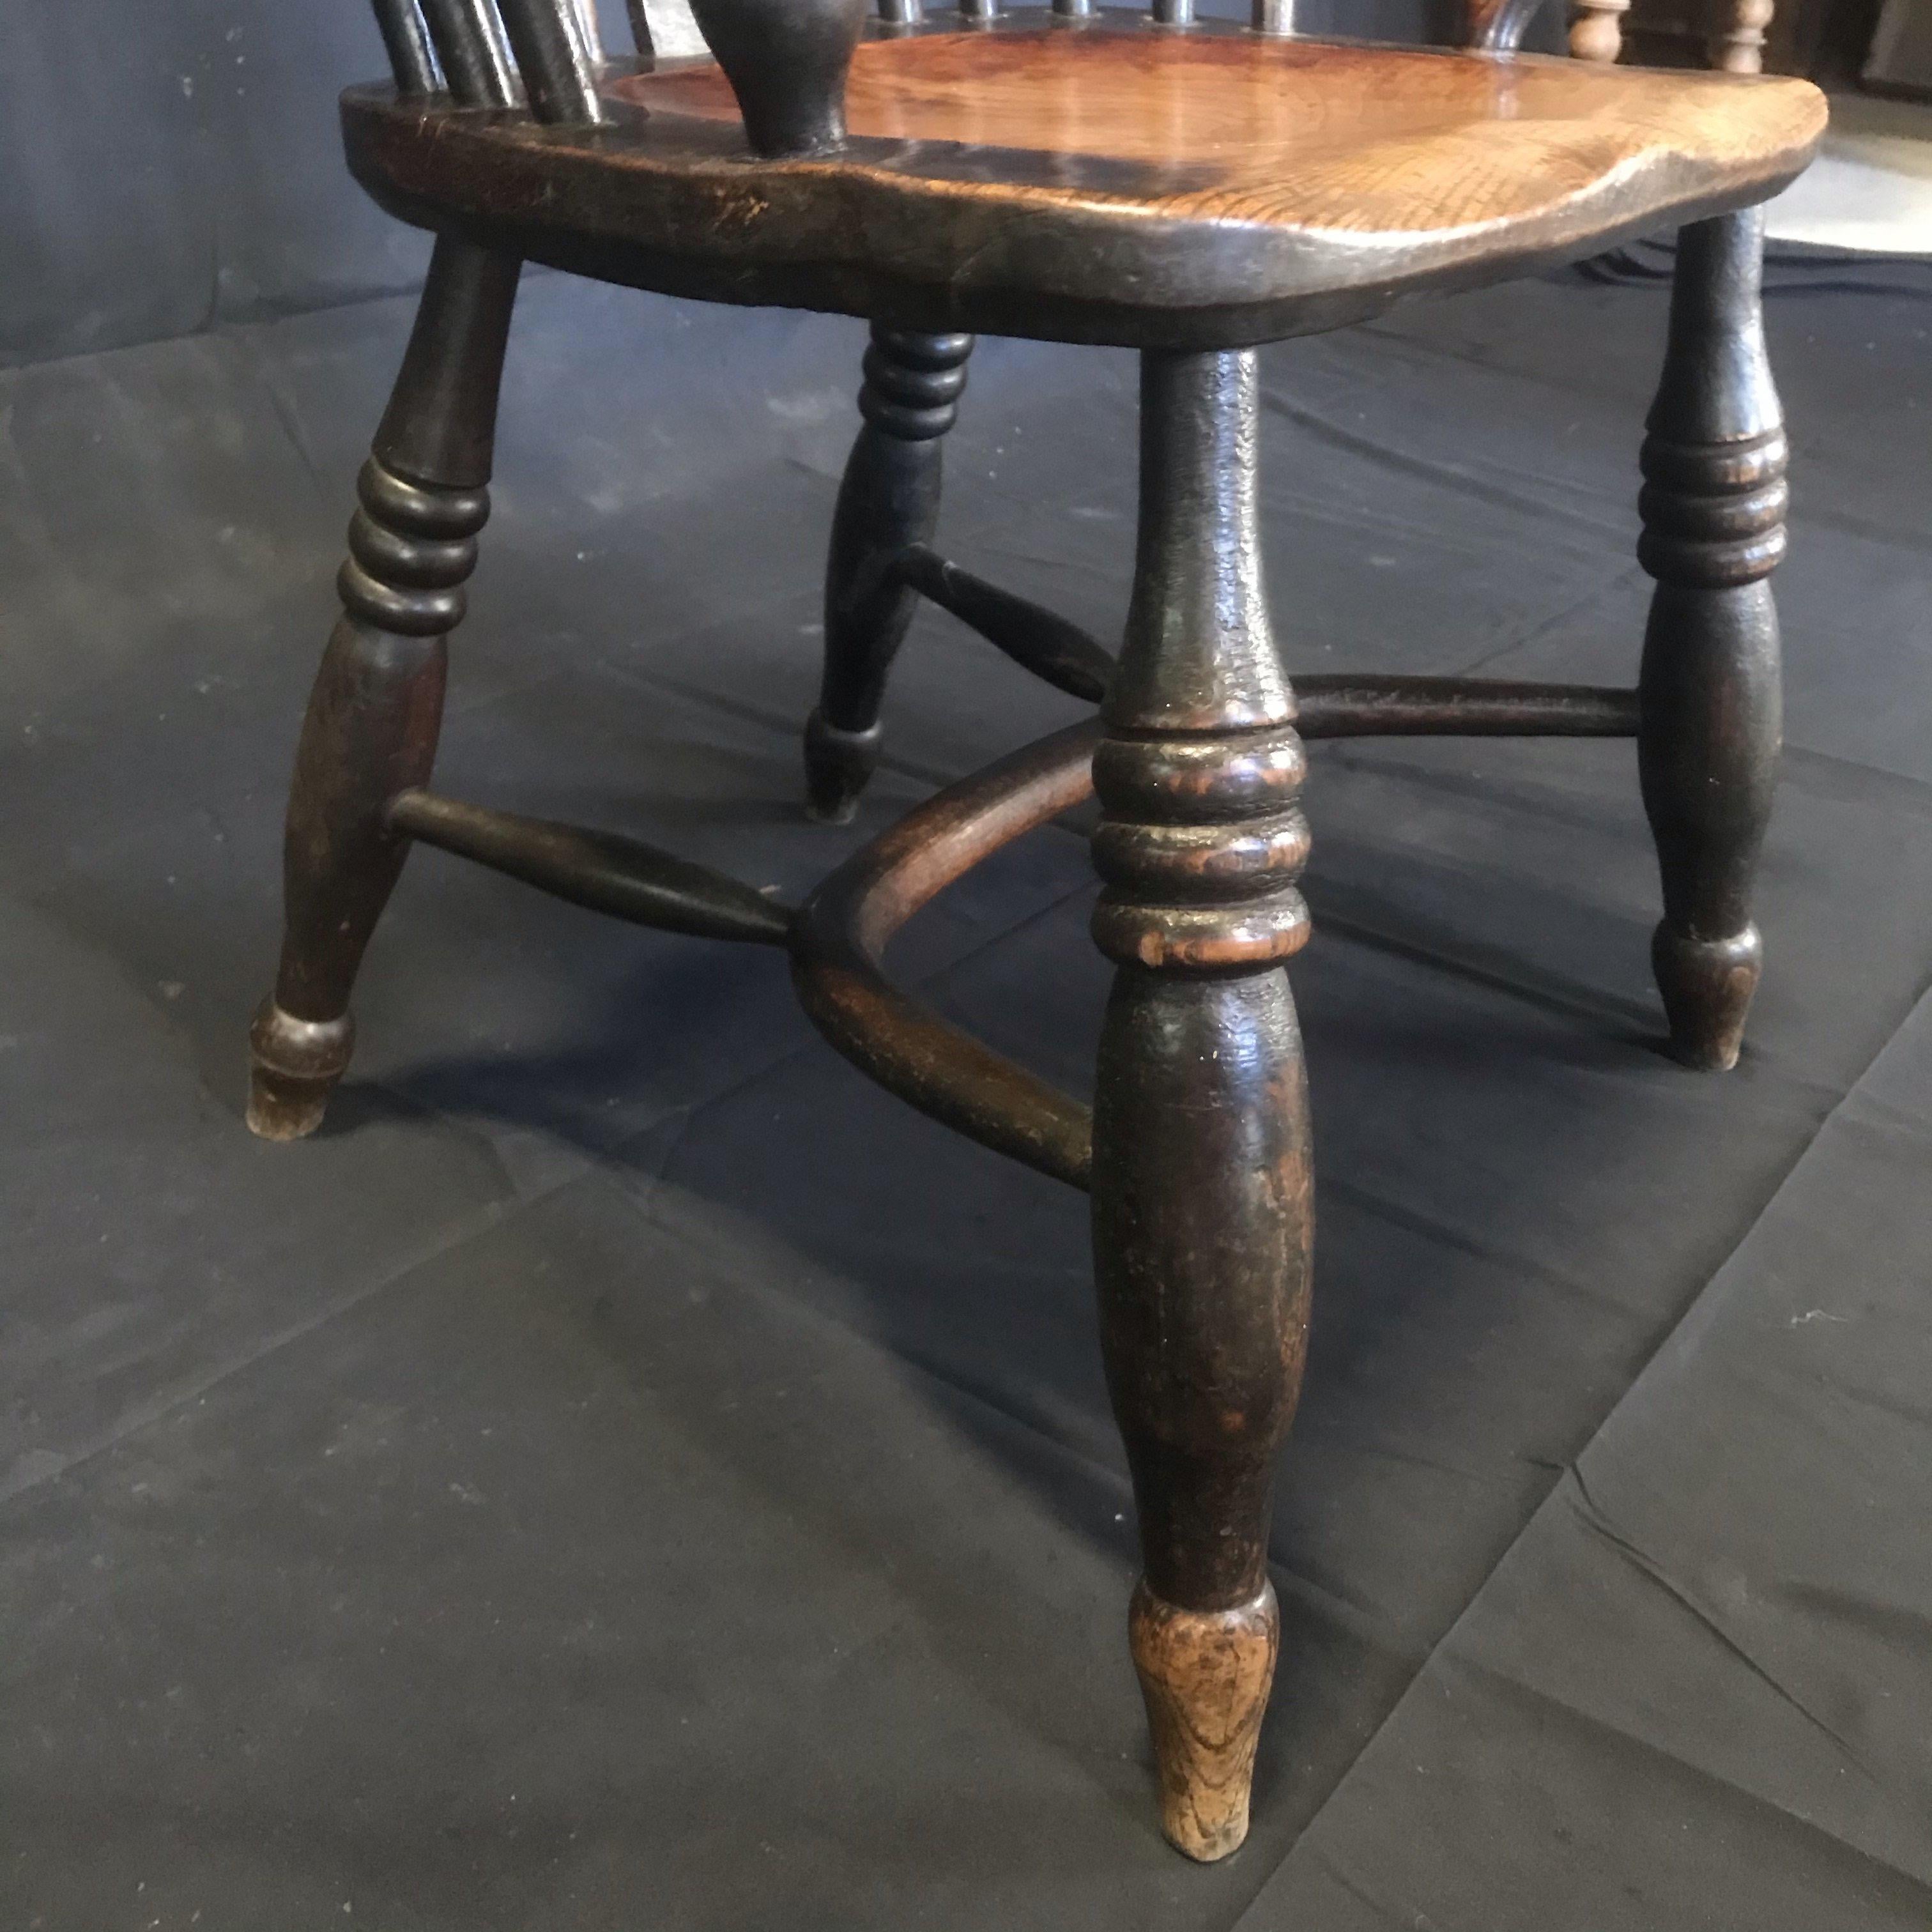 Original 19th century British oak Windsor chair purchased in the North of England.
Beautiful and very comfortable.

#4950.